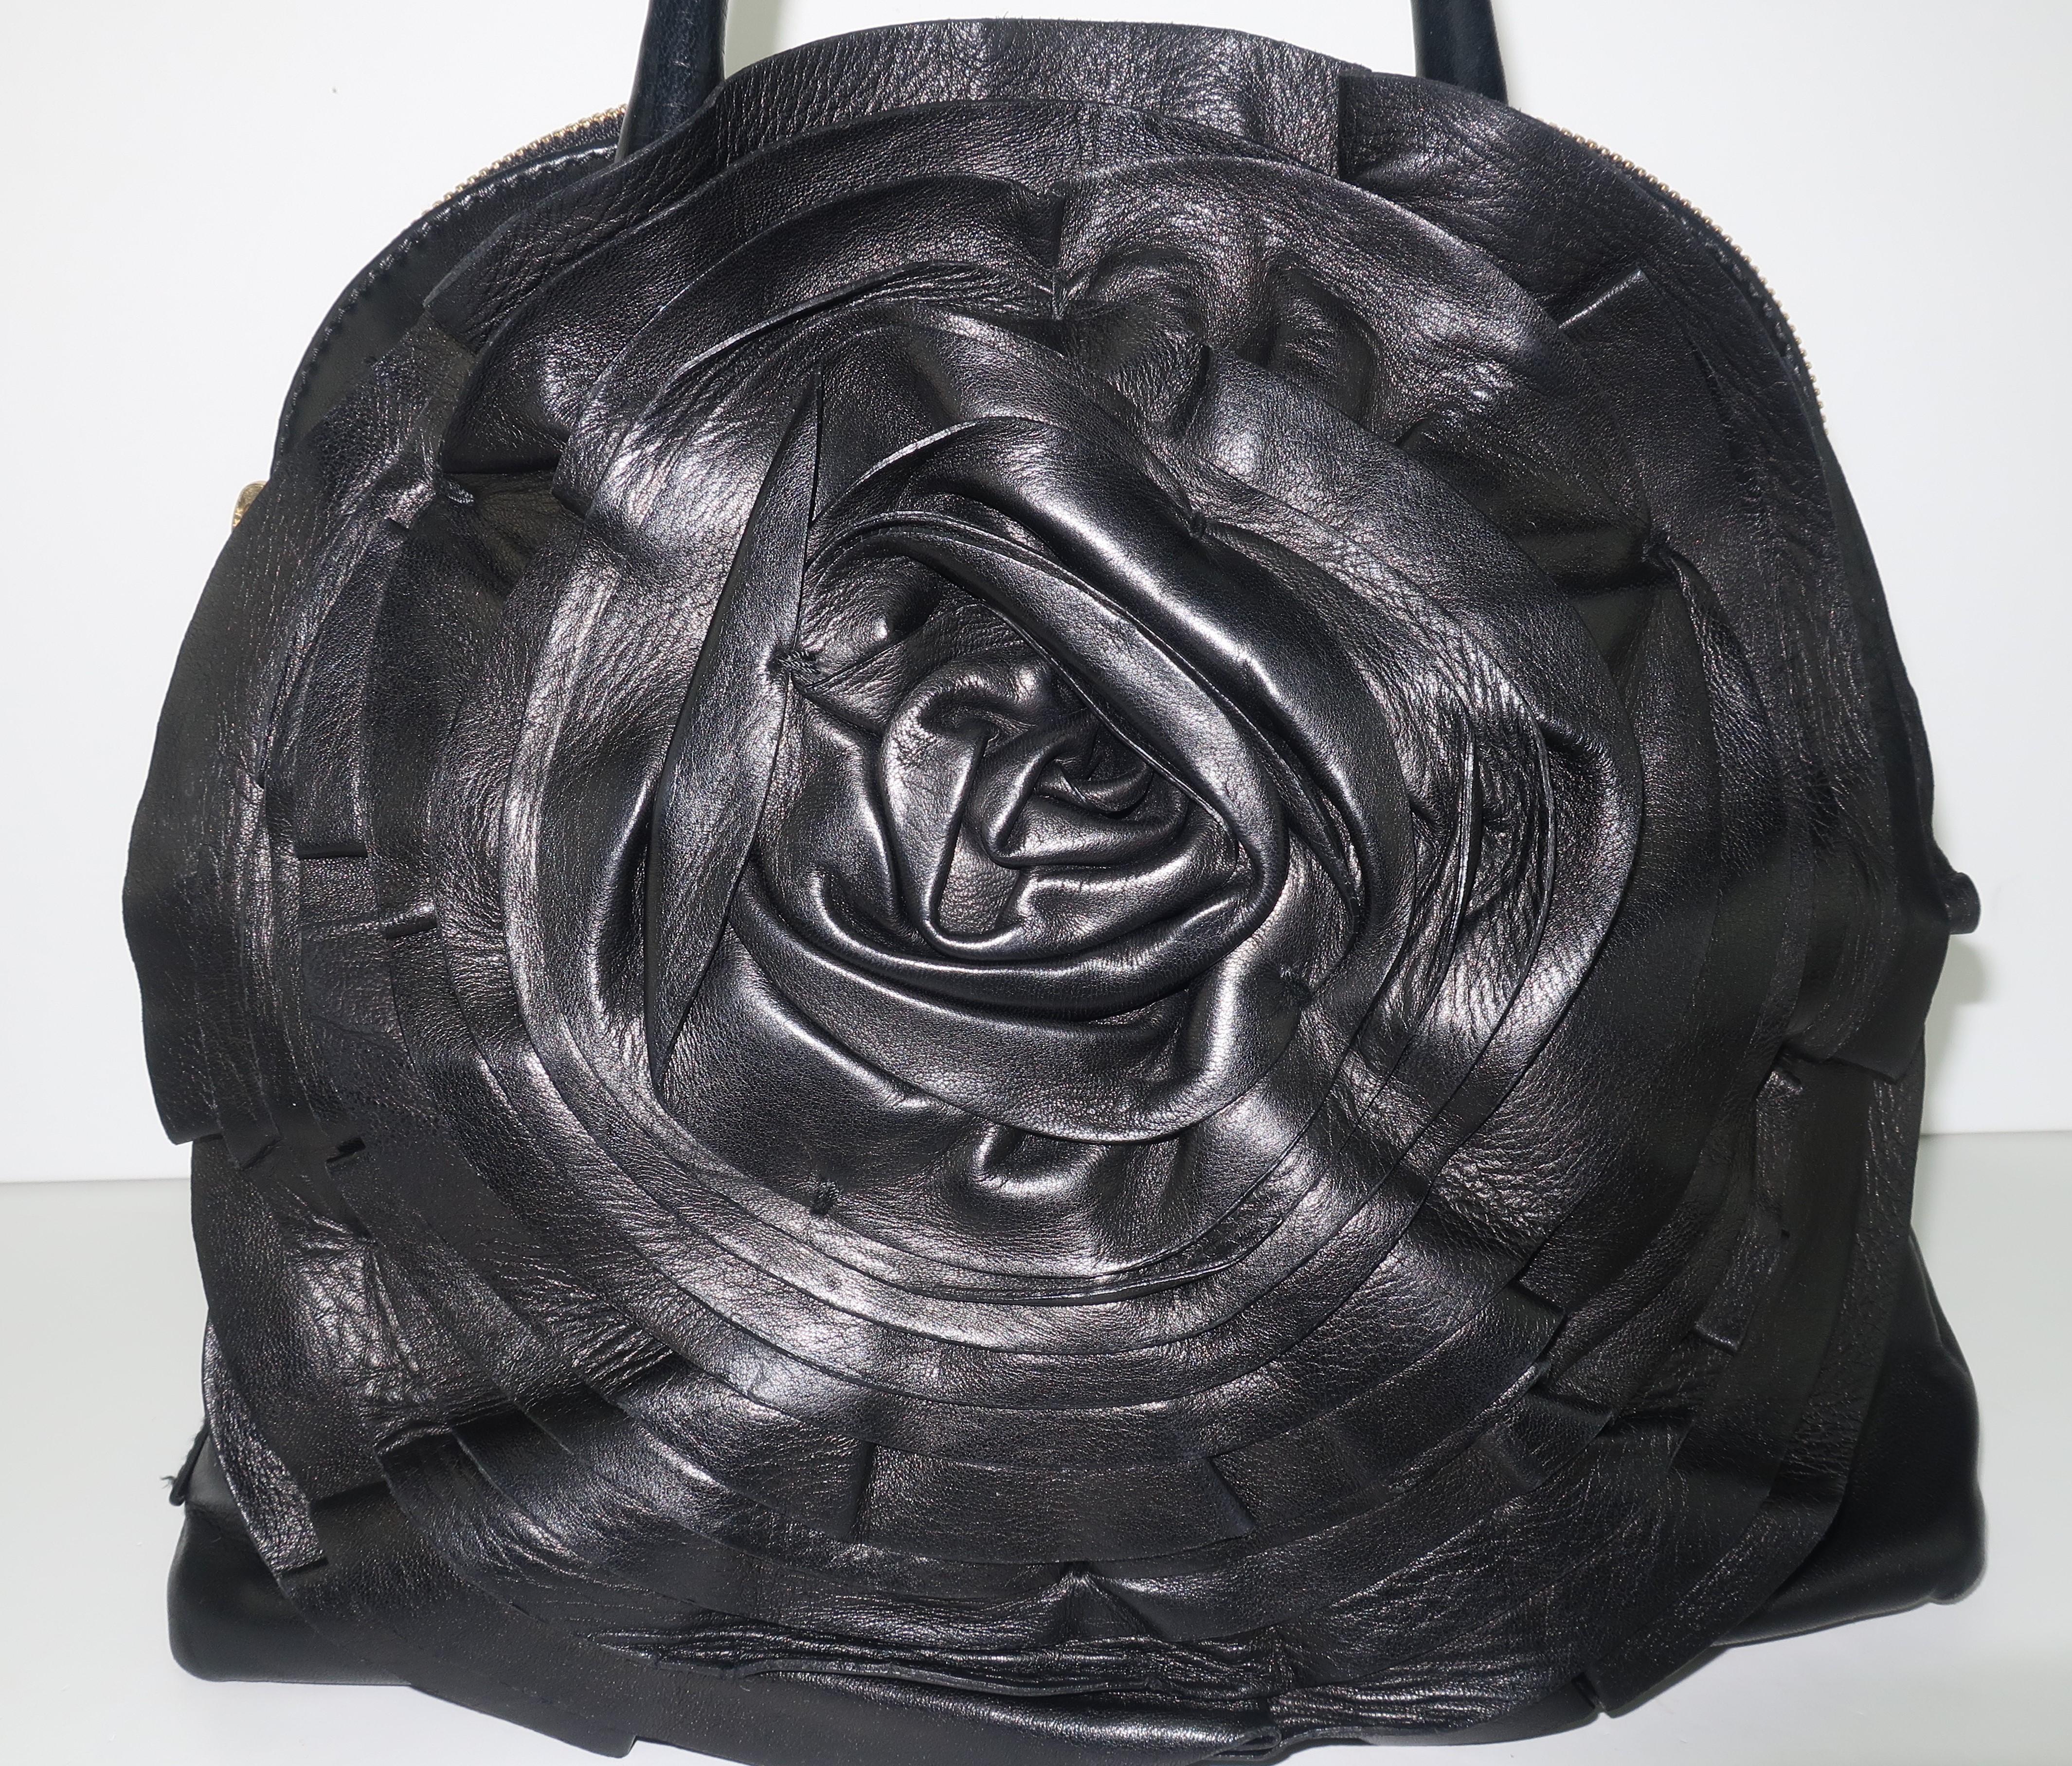 Beautiful Valentino Garavani black nappa leather handbag in a bowler style silhouette with a large rosette adorning one side.  The handbag offers double zipper closure, double top handles and a detachable shoulder strap.  The roomy interior is lined